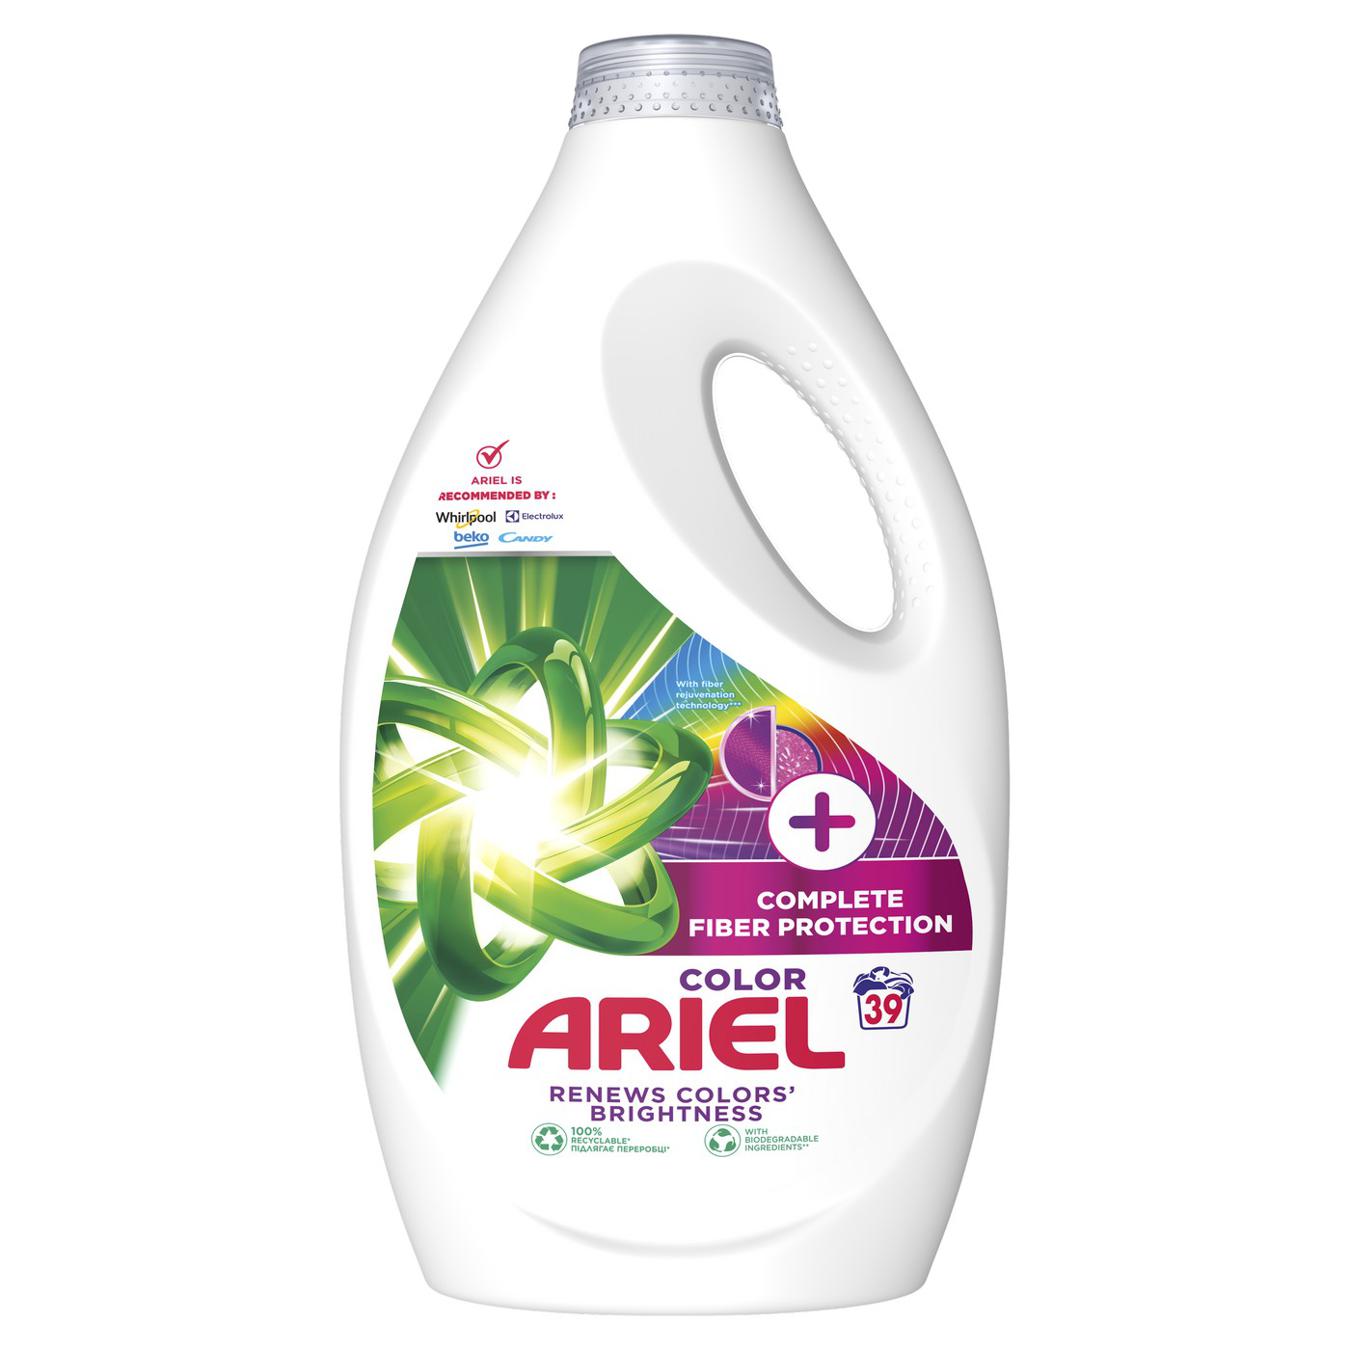 Gel for washing Ariel Color full protection of fabric 1.95 l